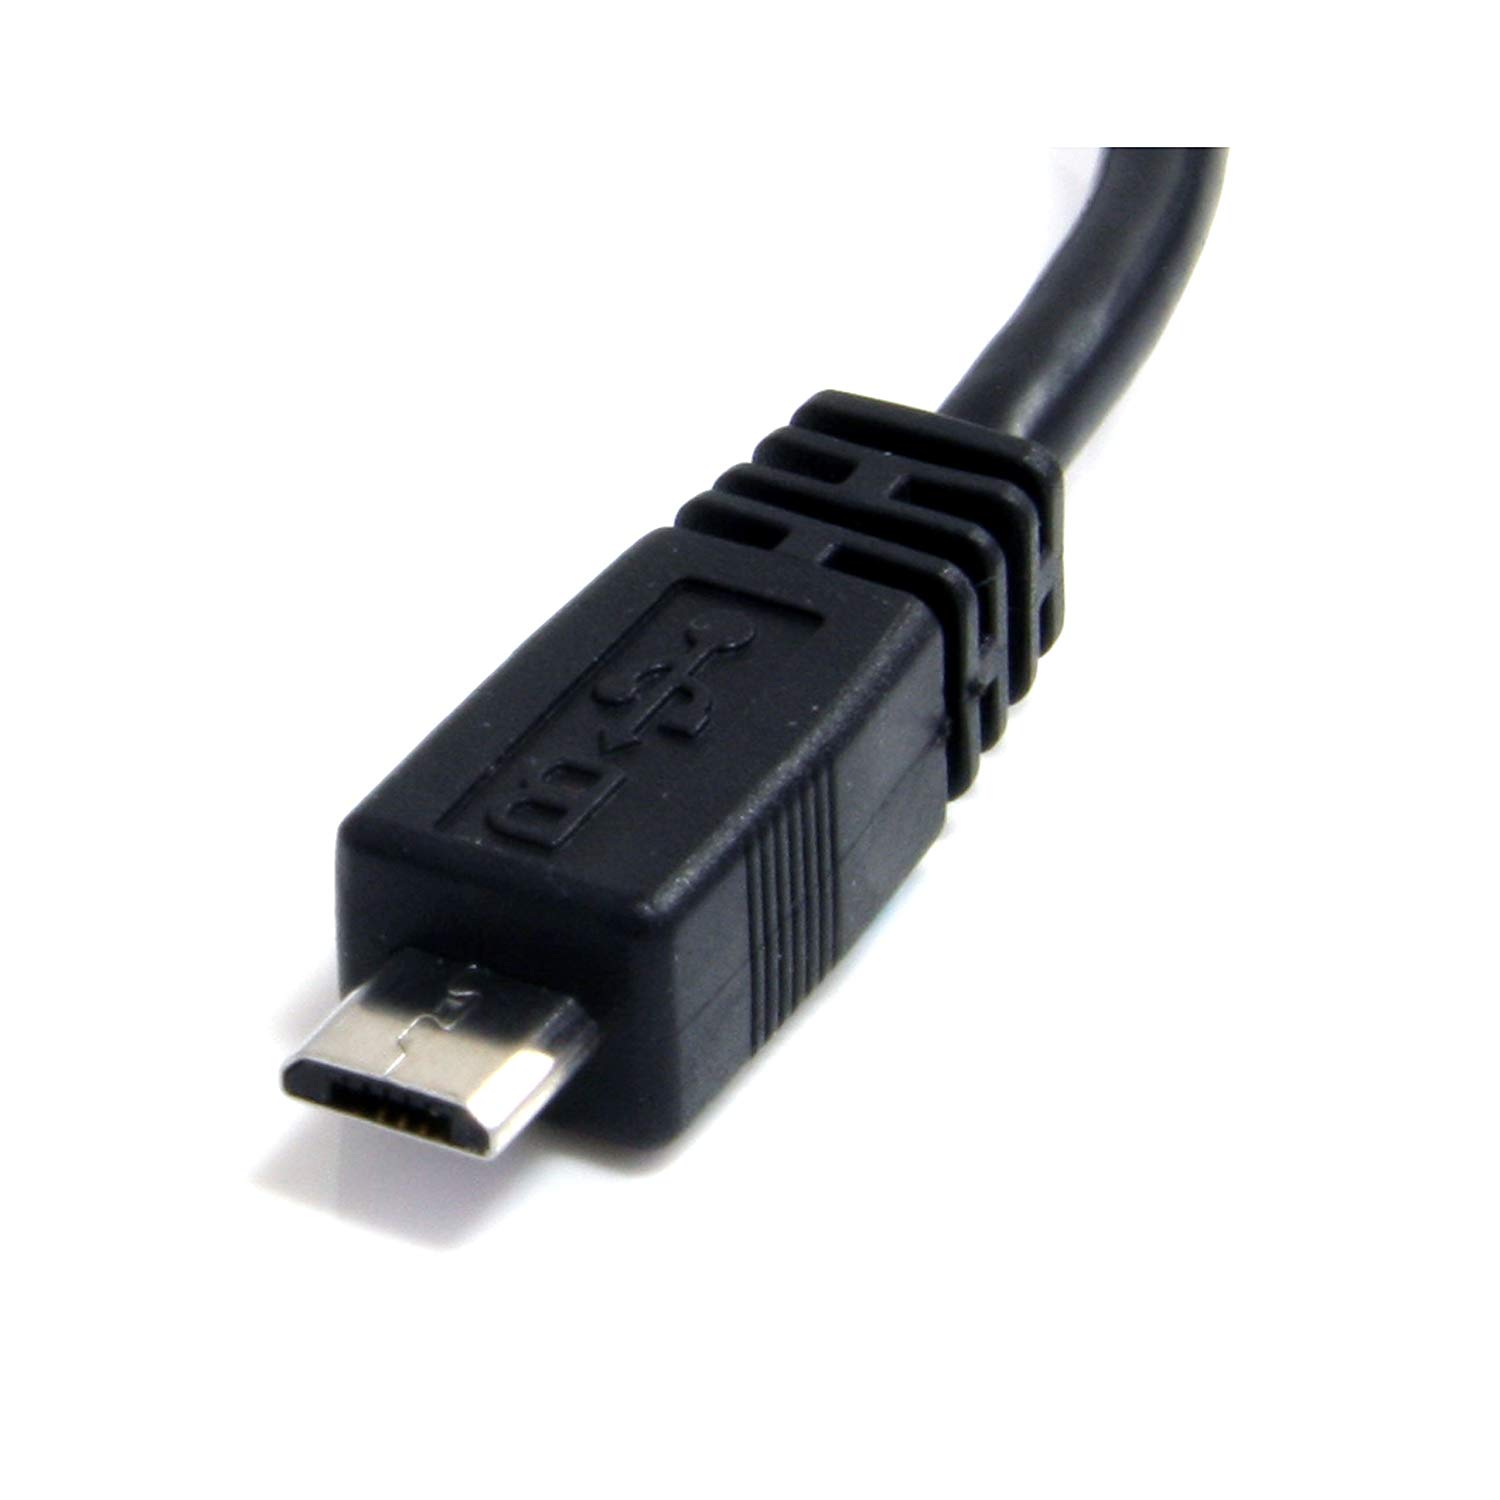 This 17 cm Short USB to Micro-USB Power Line Cable with good silicon insulating material and high-quality connector can be used to Charge or sync Micro USB mobile devices